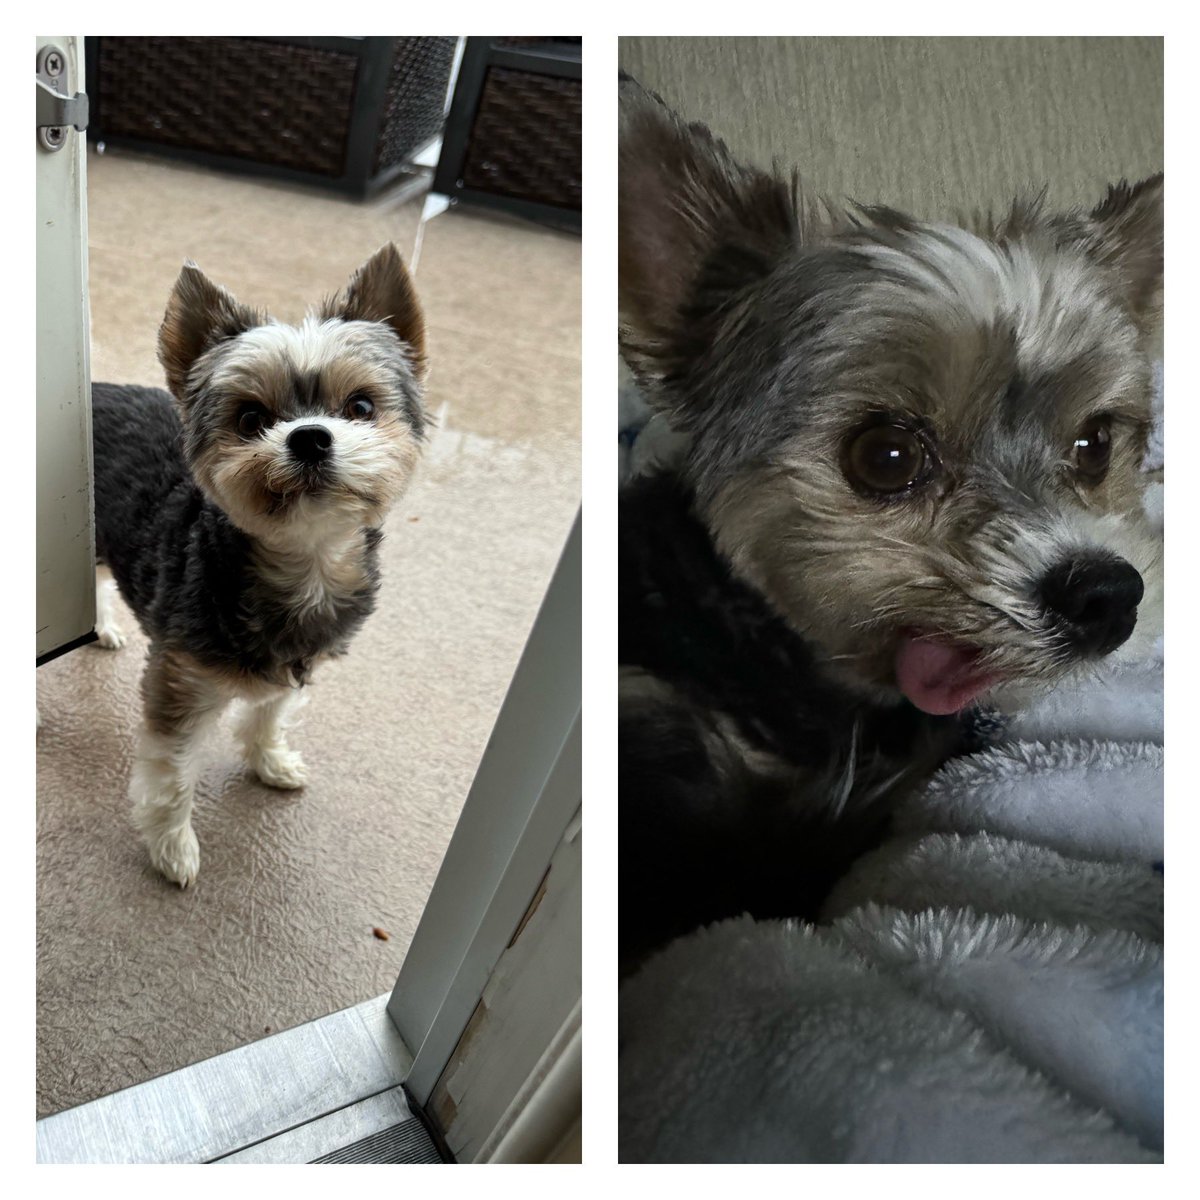 Gio. It’s a gloomy windy rainy cold stay in bed tongue 👅 out Tuesday for us.🌧️☂️😩 #tongueouttuesday #Rainyday #gloomy #yucky